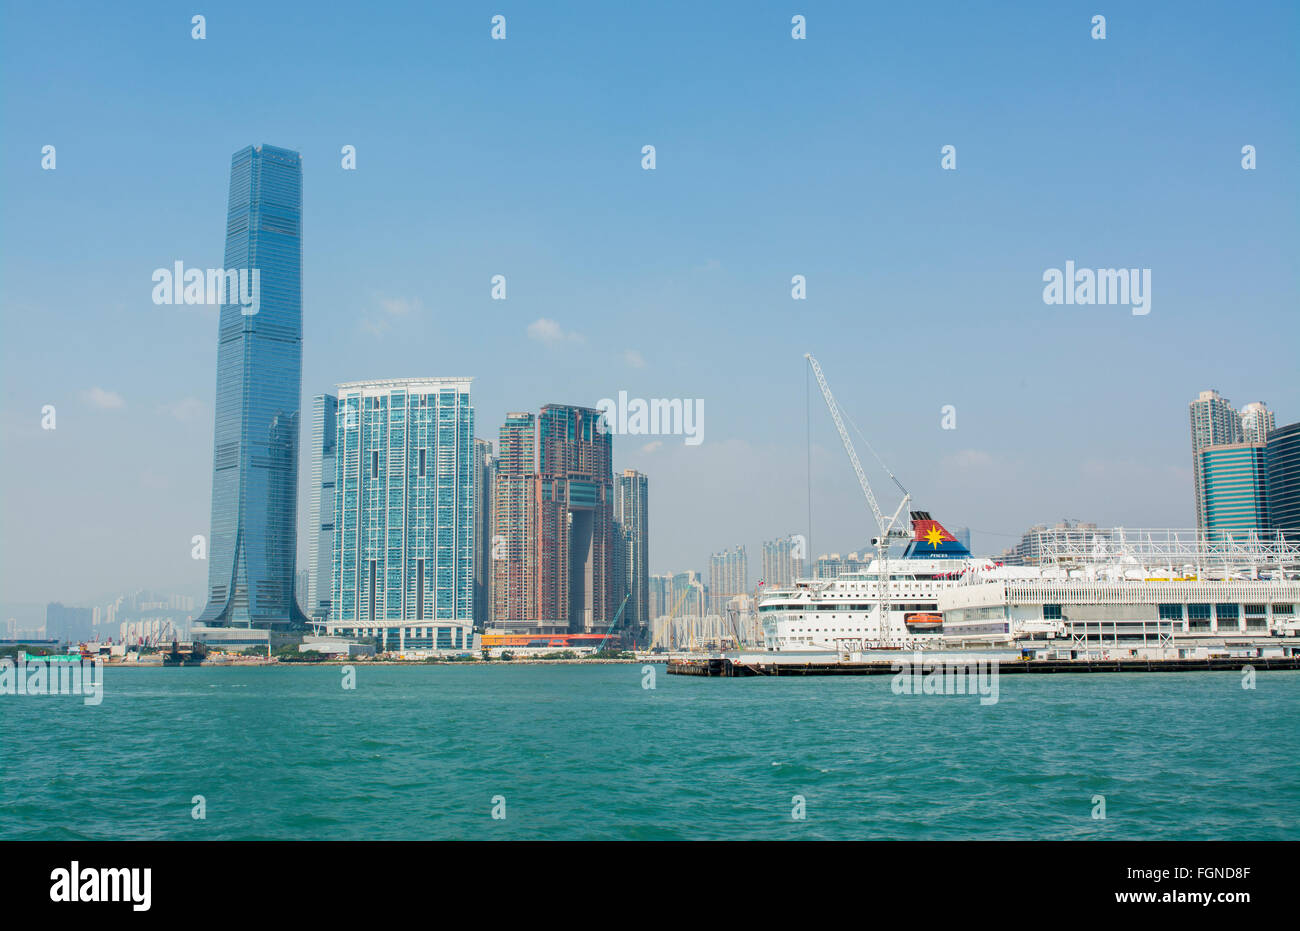 Hong Kong China  Kowloon new International Commerce Center in Kowloon the 9th Tallest Building in the world with crusie ship Stock Photo